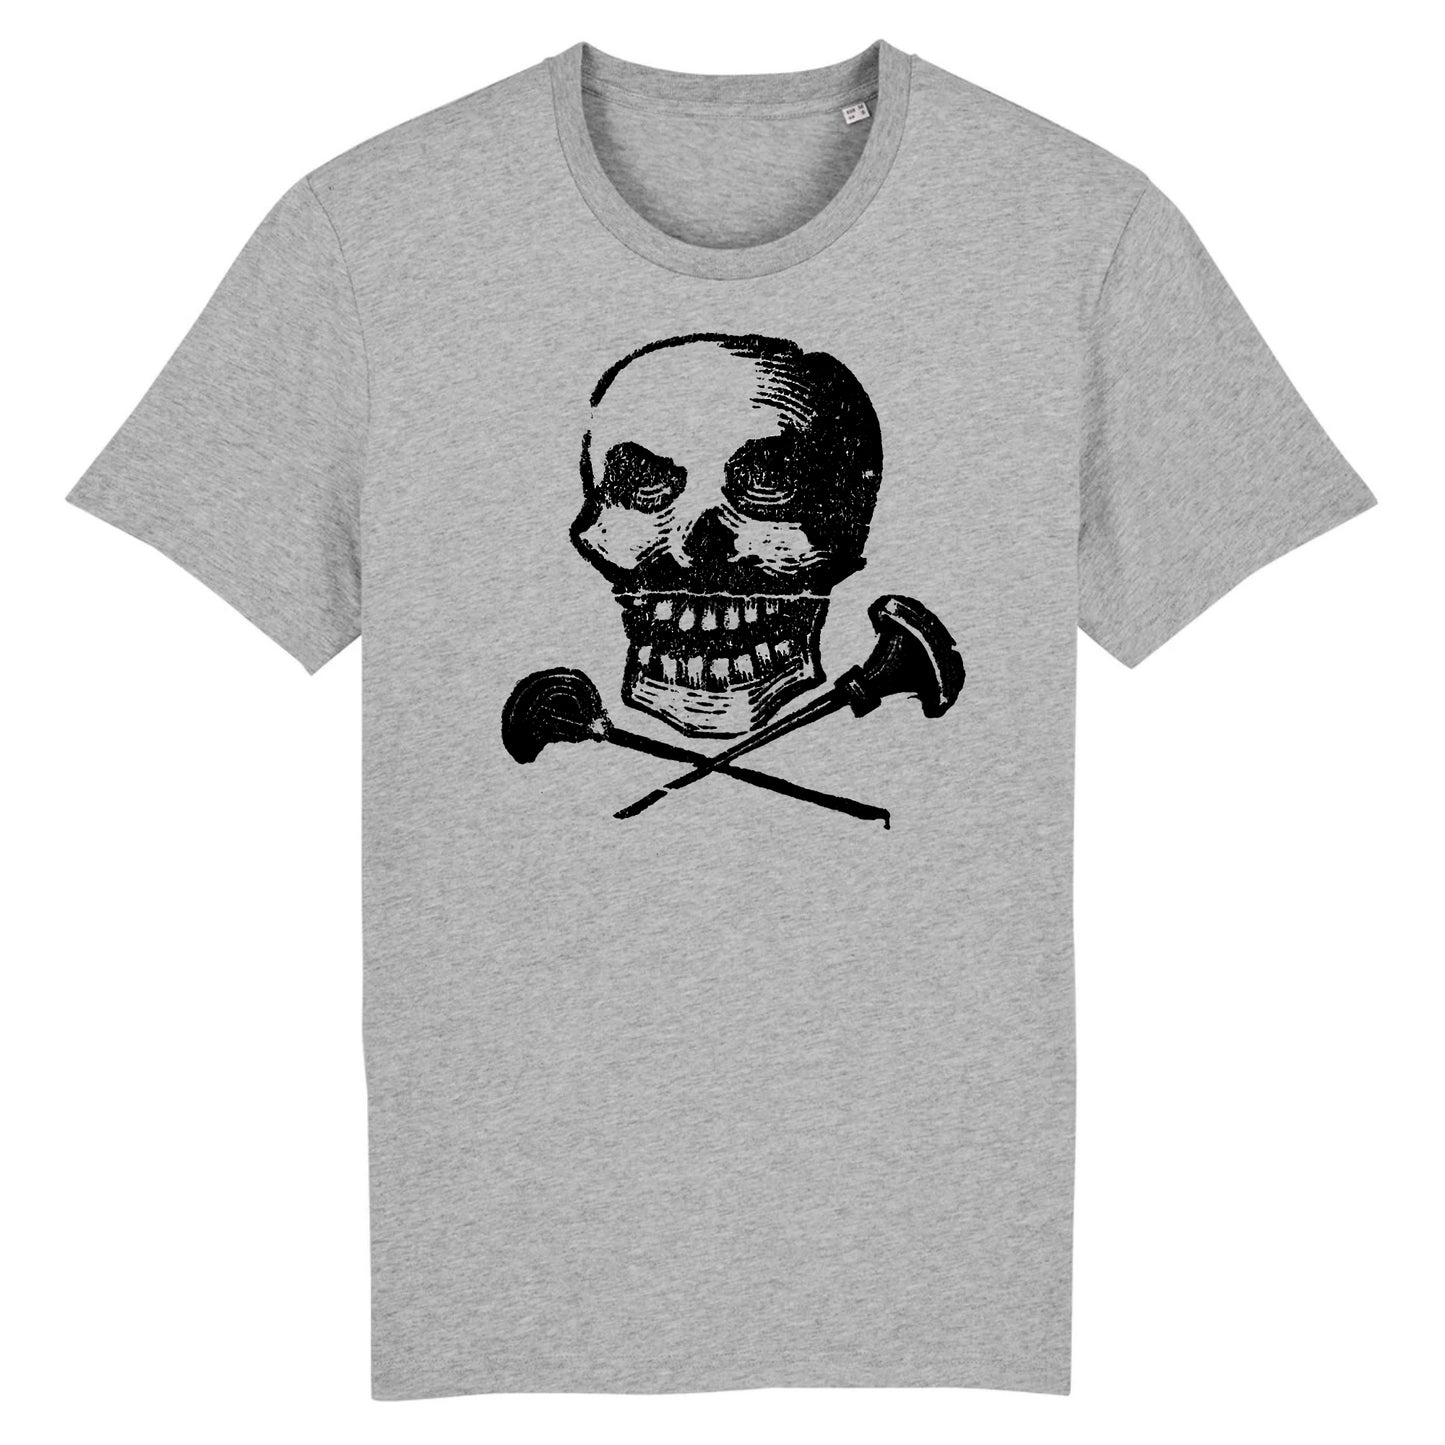 Calavera of the Engraver by Jose Guadalupe Posada - published 1947 - Organic Cotton T-Shirt